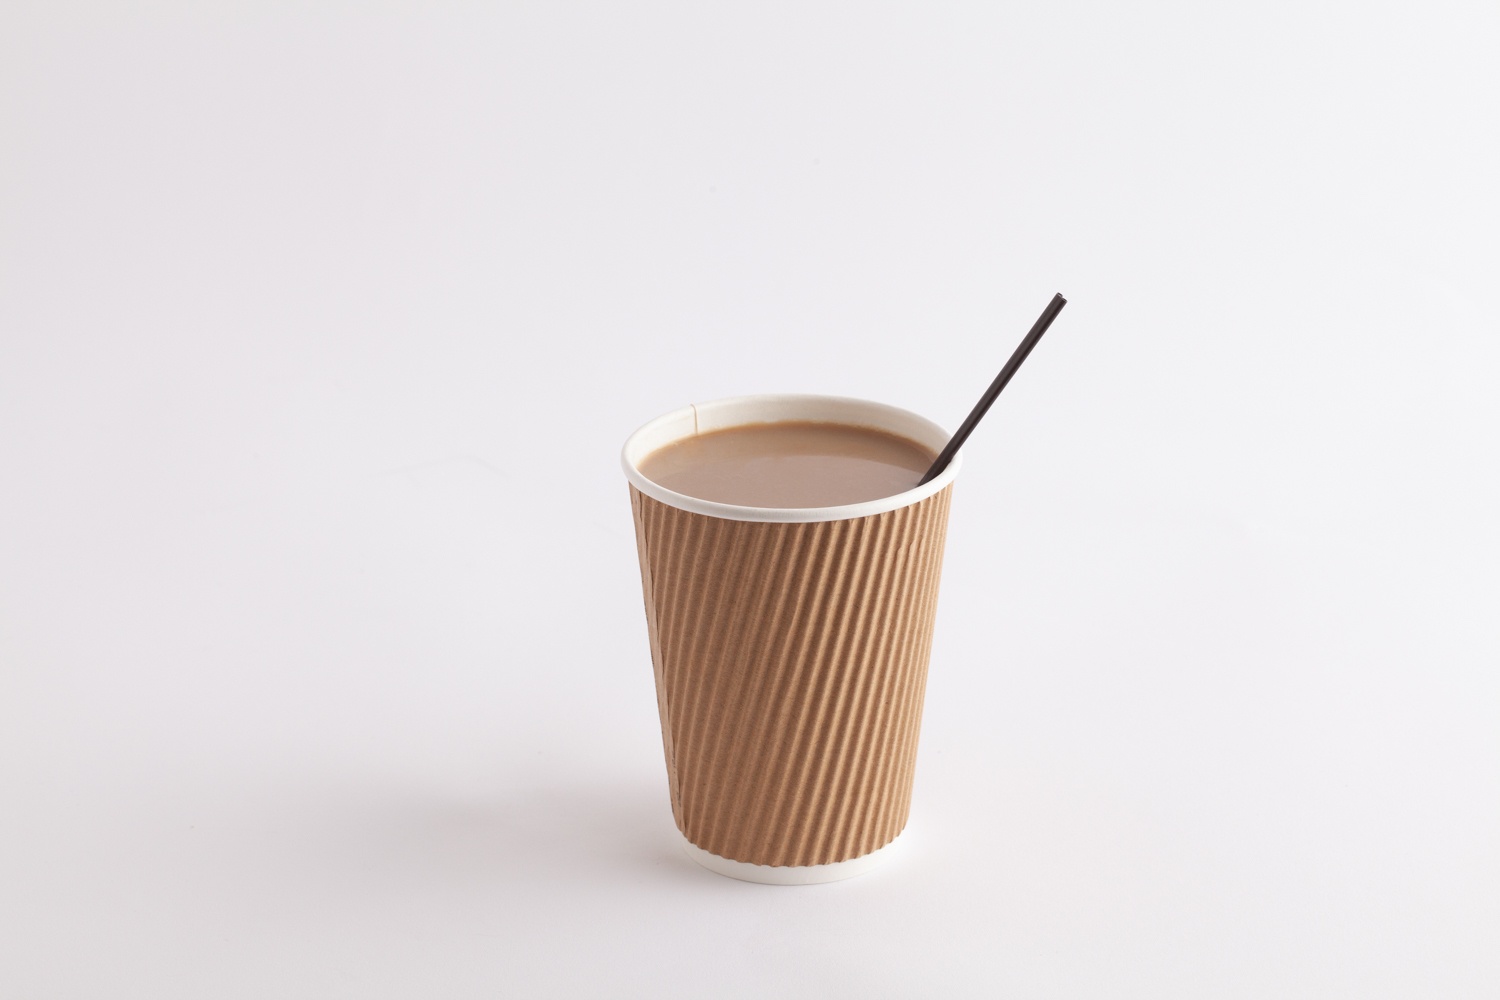 paper coffee cup with coffee stirrer